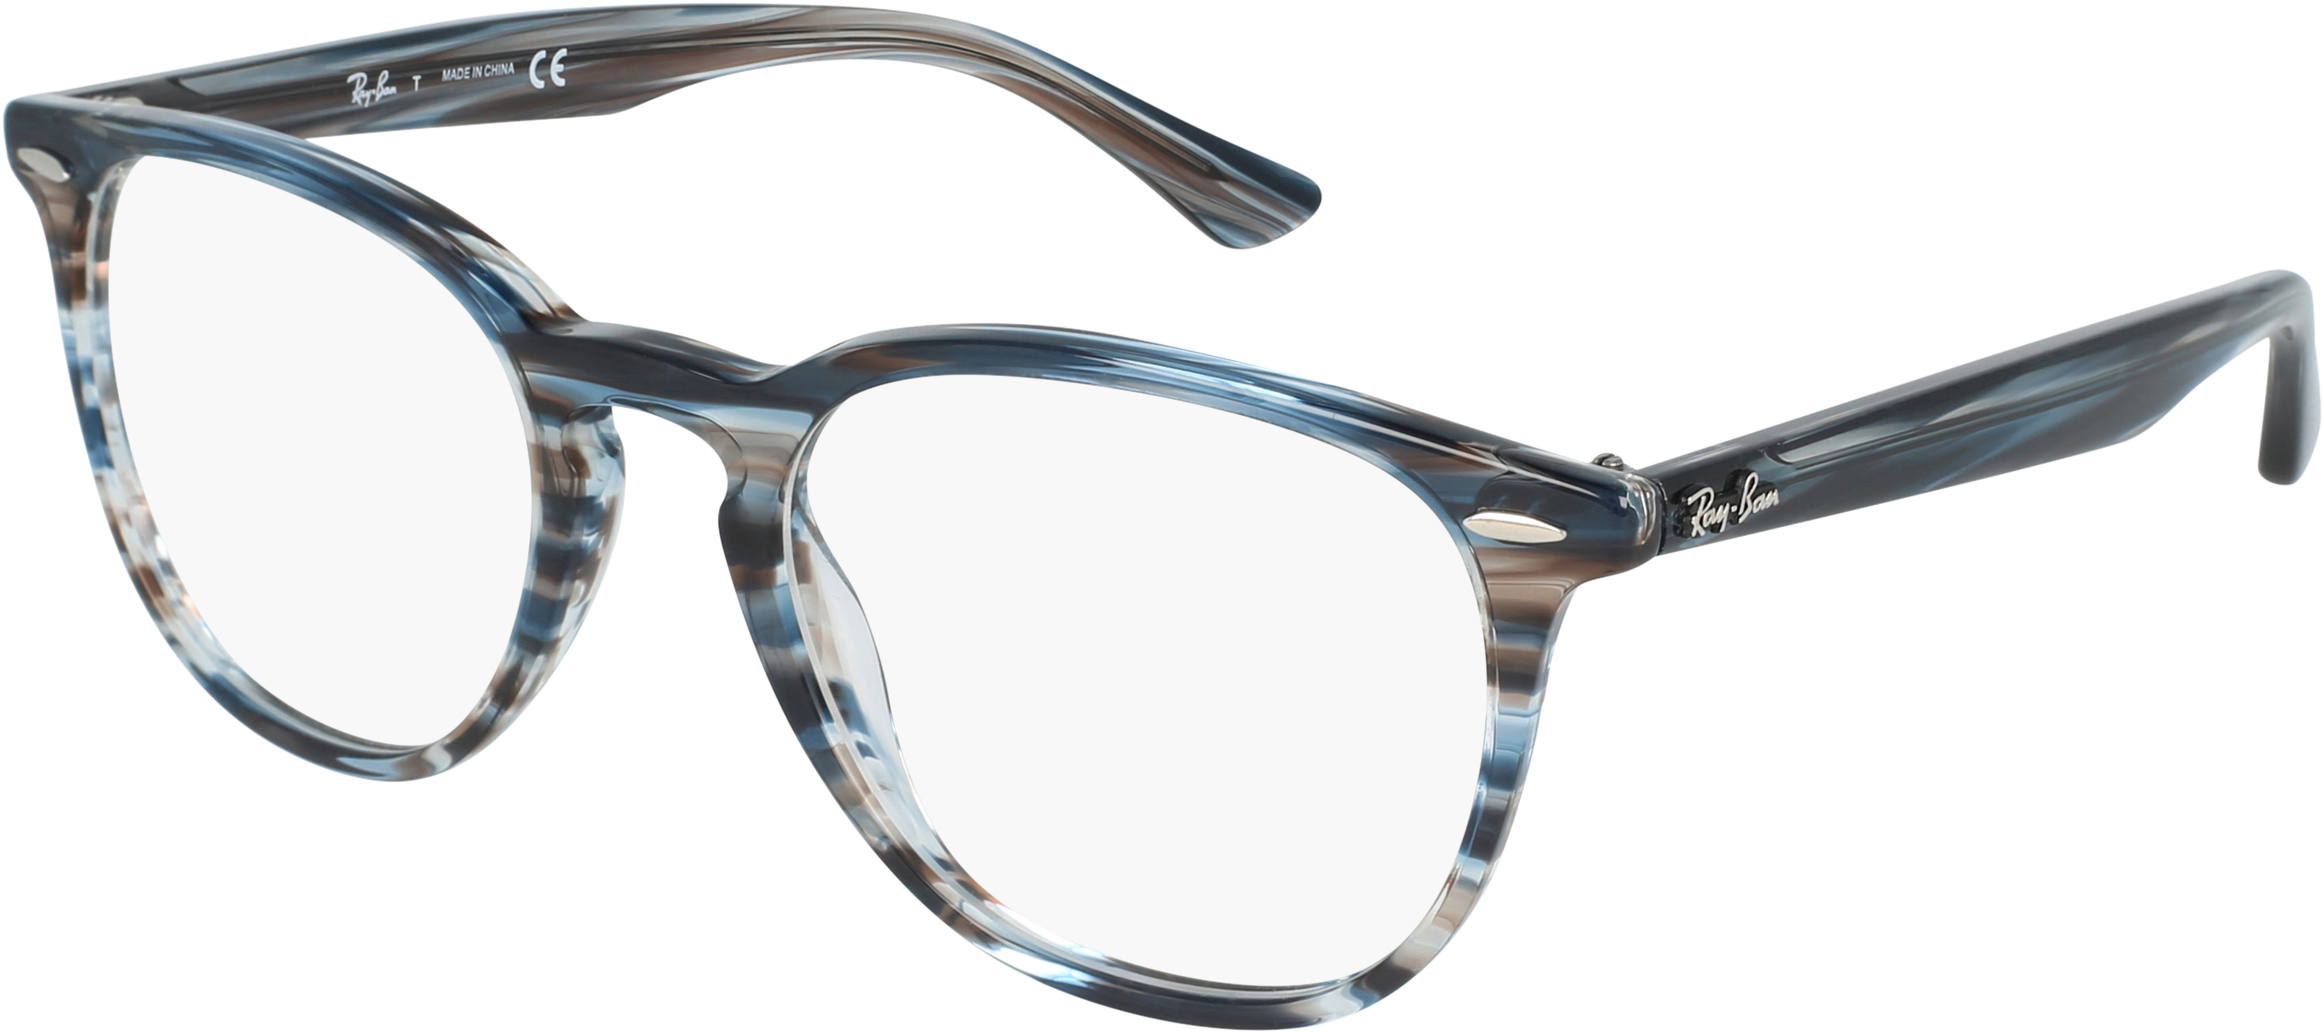 R Rb 7159 Unisex S Eyeglasses Ray Ban Eyeglasses Blue Gray Clipart Large Size Png Image Pikpng